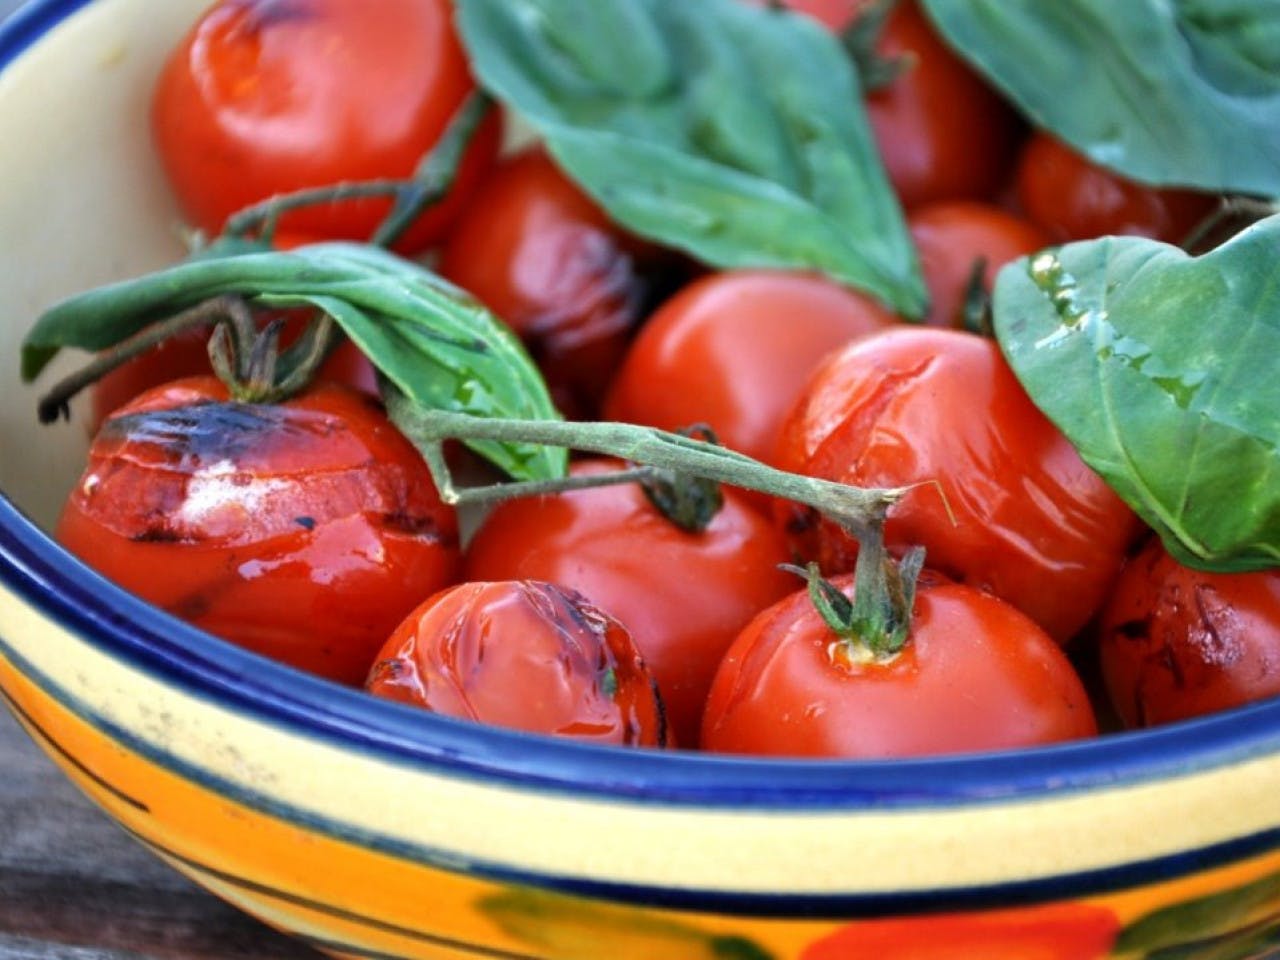 Grilled cherry tomatoes with basil leaves